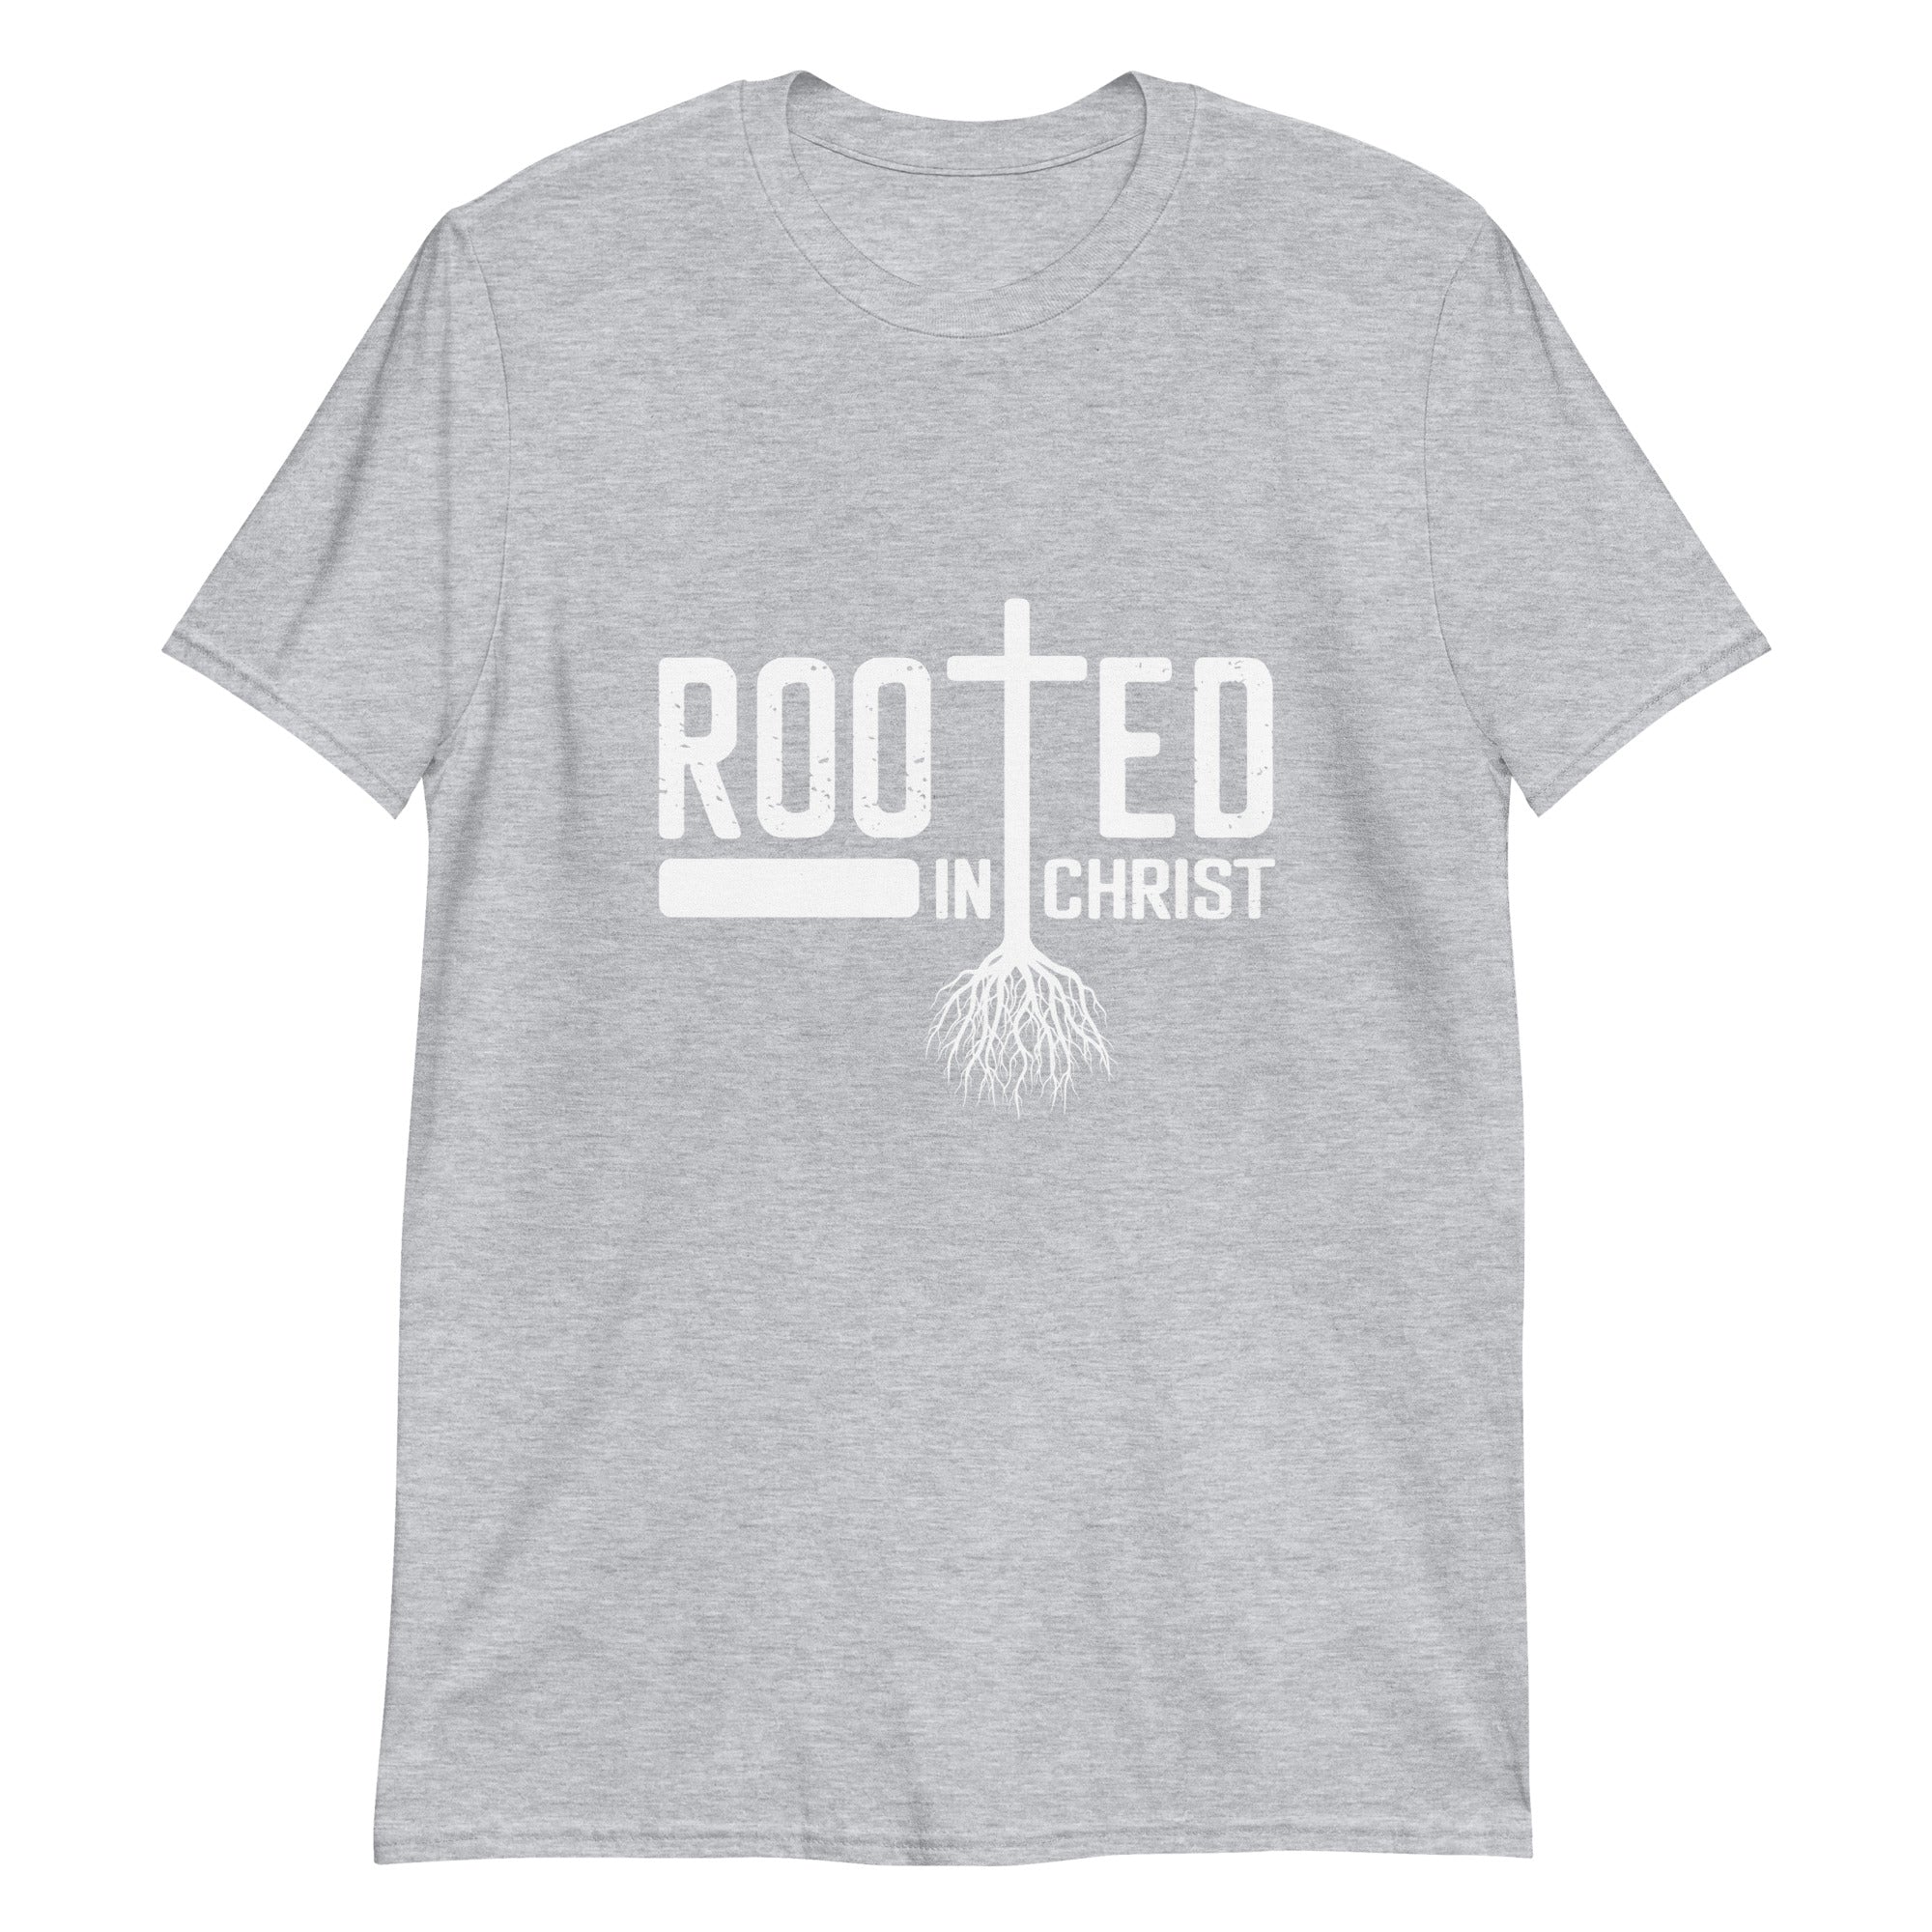 Rooted in Christ Christian Short-Sleeve Unisex T-Shirt